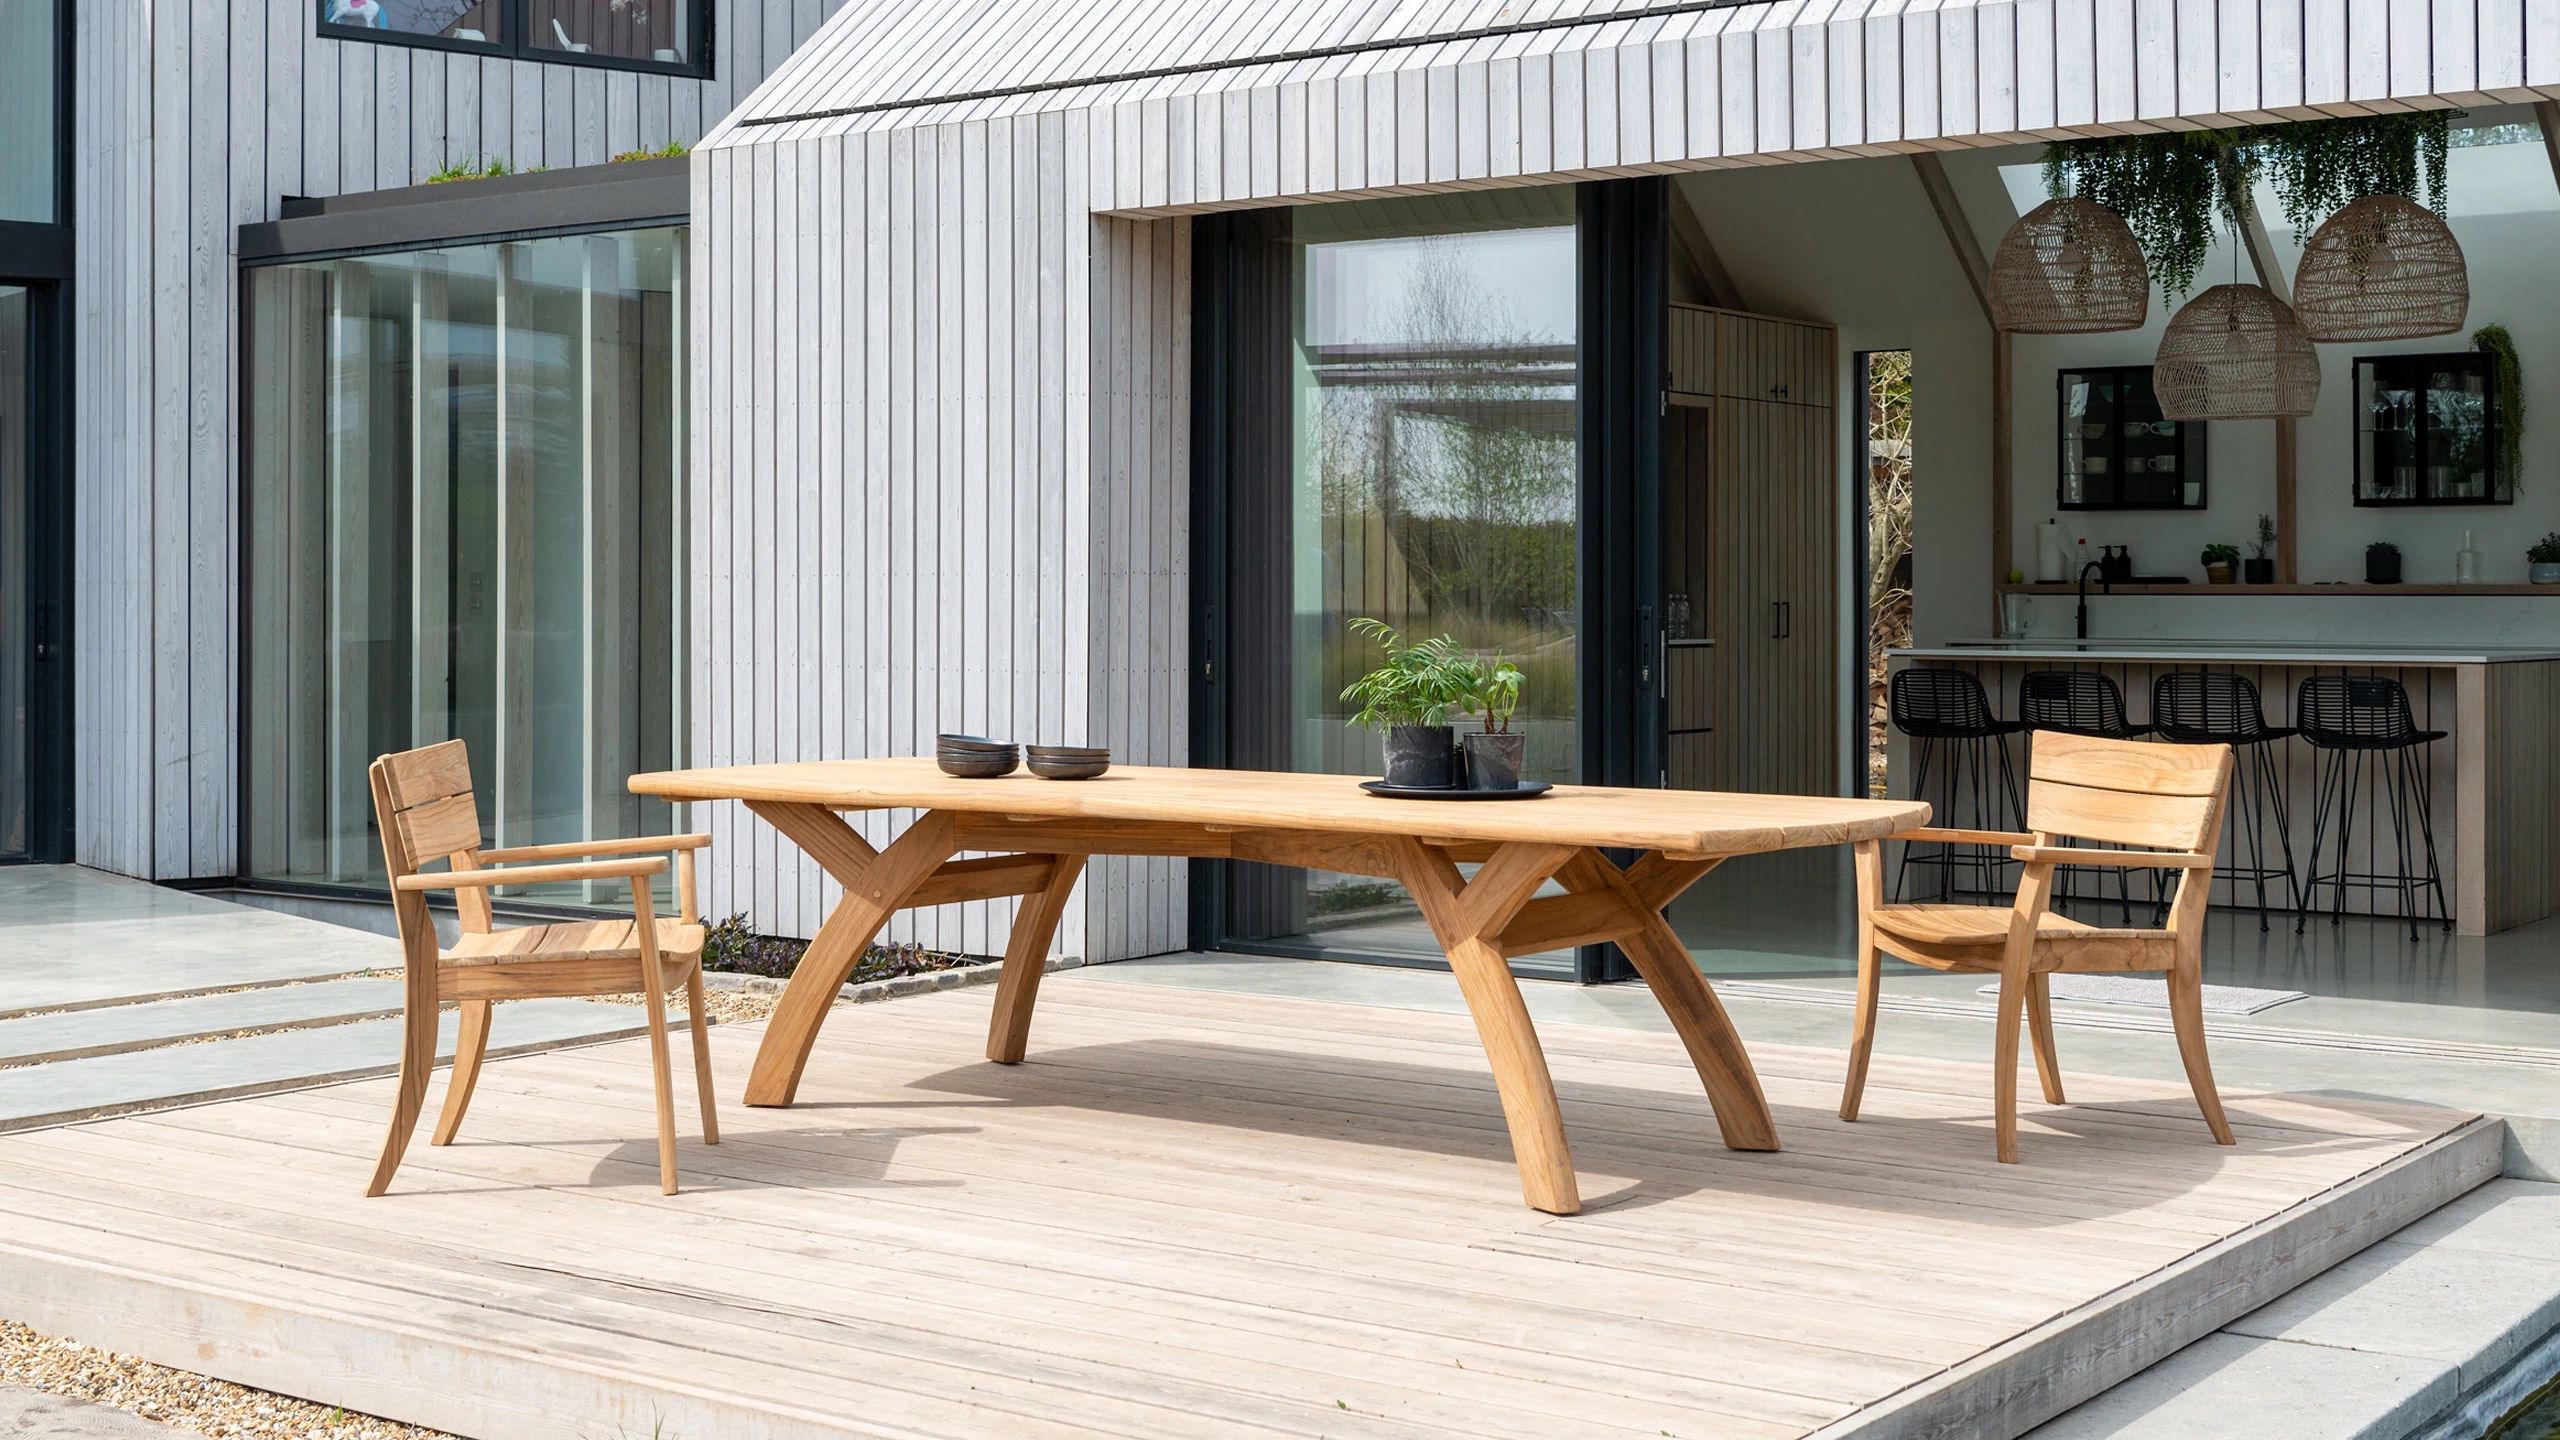 Acacia Wood With Table Garden Wooden Furniture Throughout Preferred Wooden Garden Furniture – Alexander Rose (View 5 of 15)